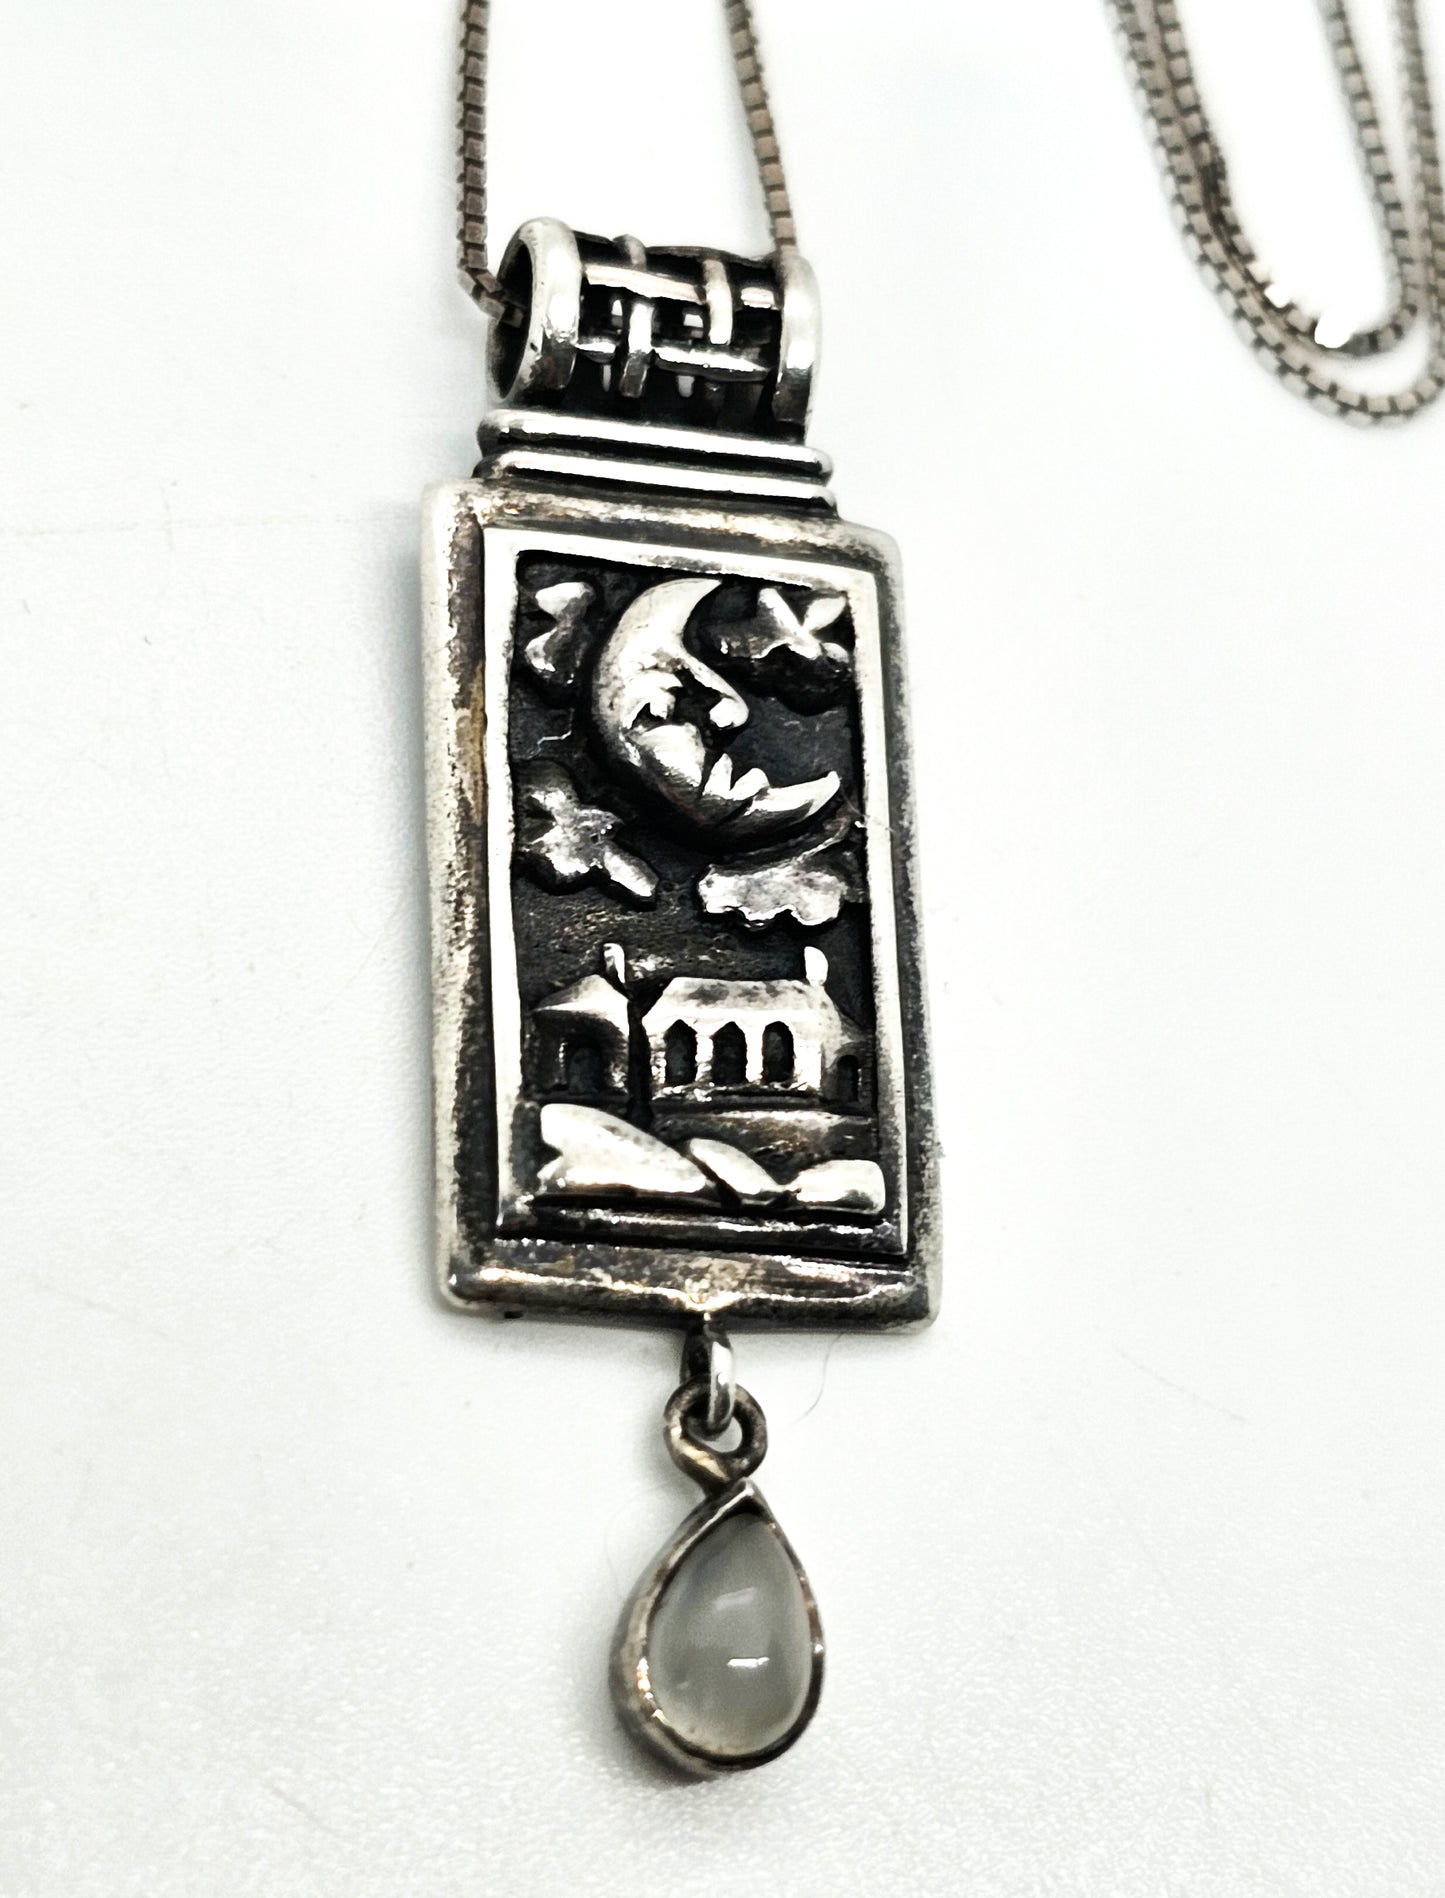 The Moon Tarot Card Amy Zerner for Peter Stone PSCL sterling silver necklace